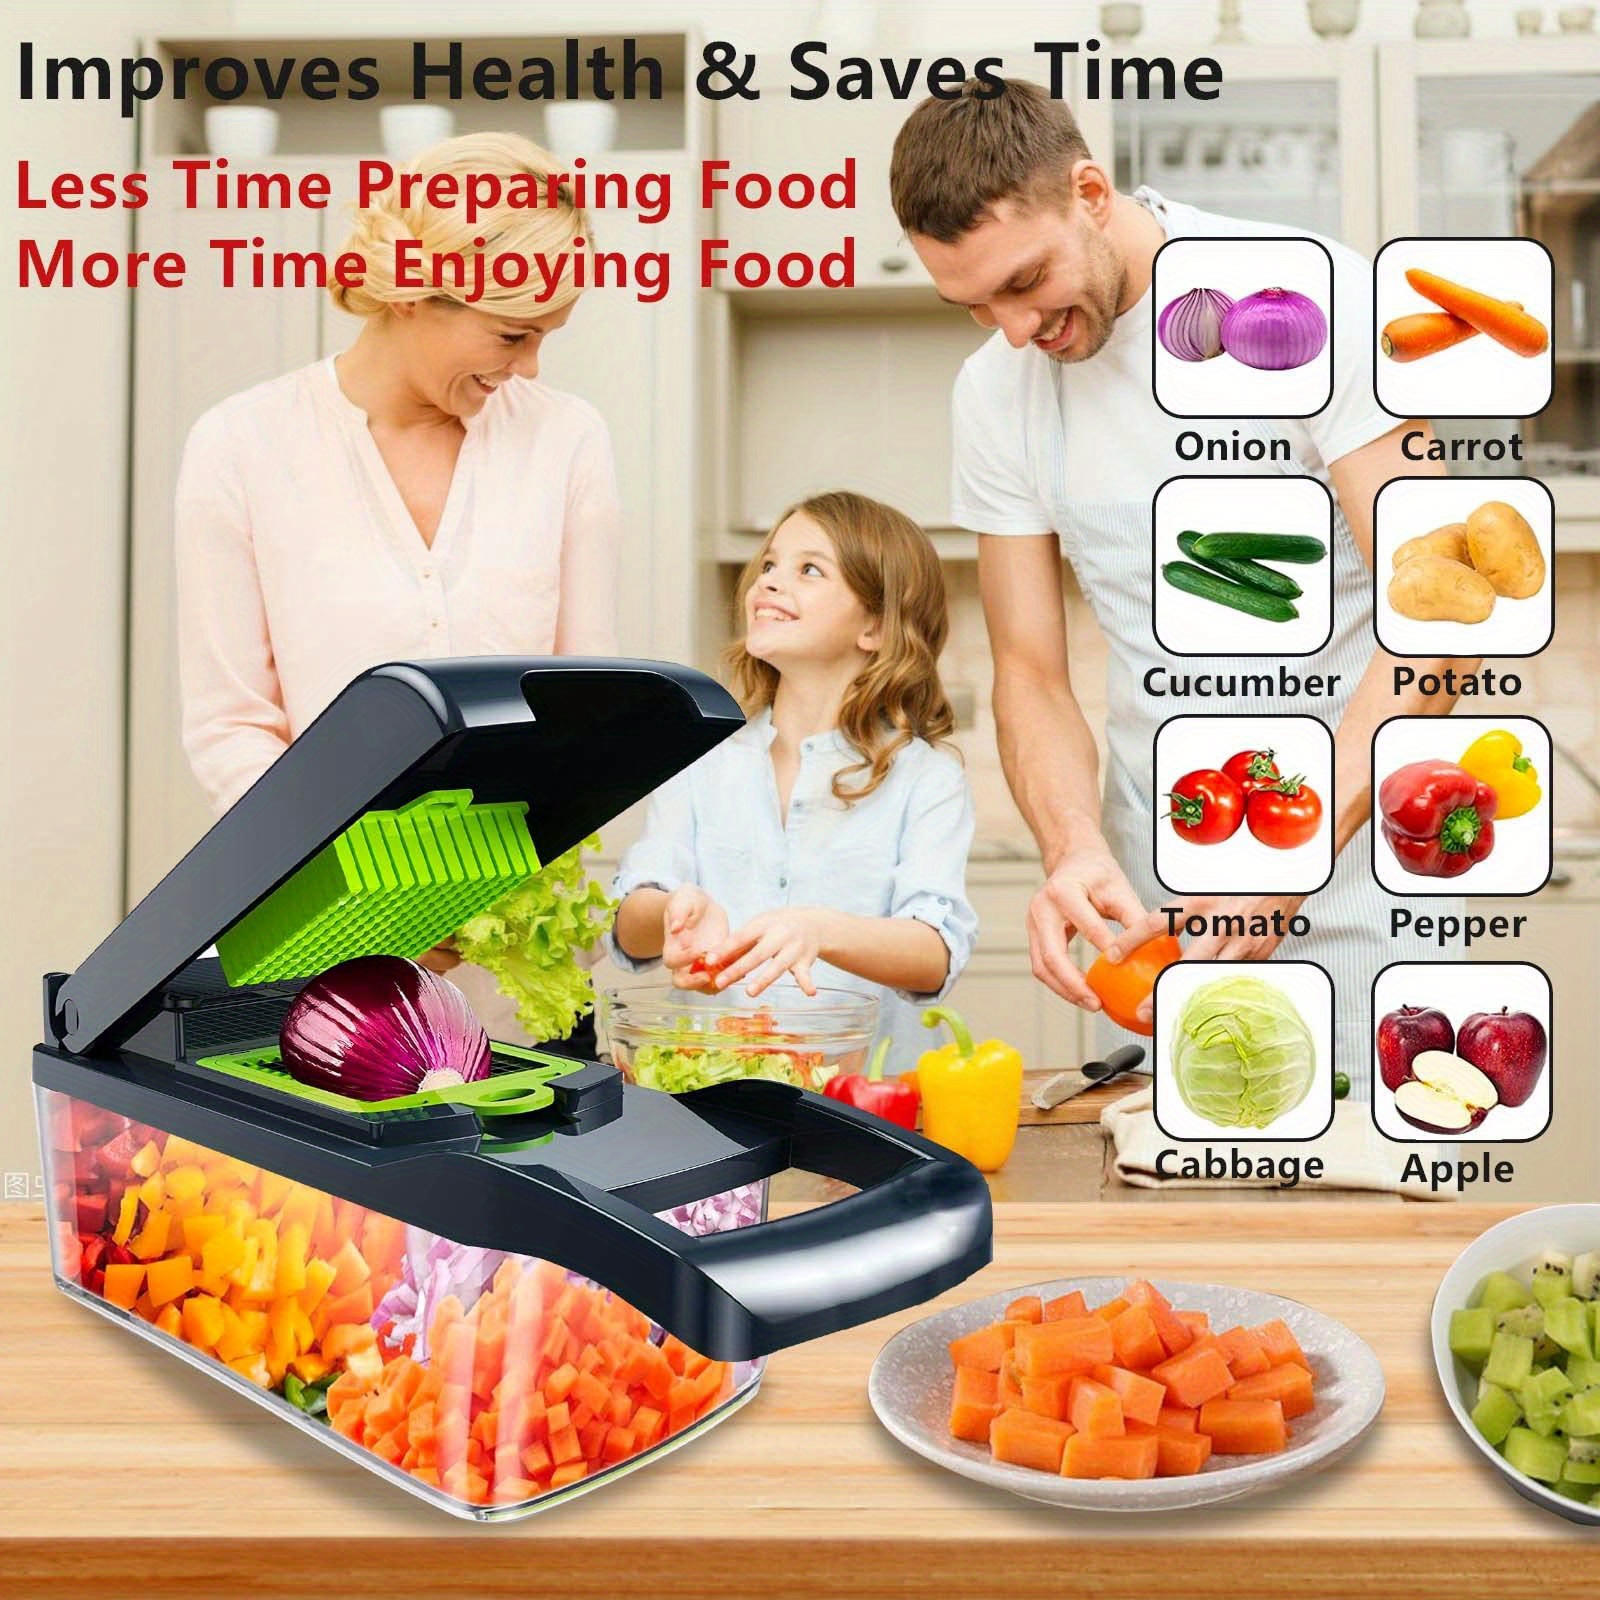  Vegetable Chopper, Pro Onion Chopper, 14 in 1Multifunctional Food  Chopper, Kitchen Vegetable Slicer Dicer Cutter,Veggie Chopper With 8  Blades,Carrot and Garlic Chopper With Container(blue): Home & Kitchen